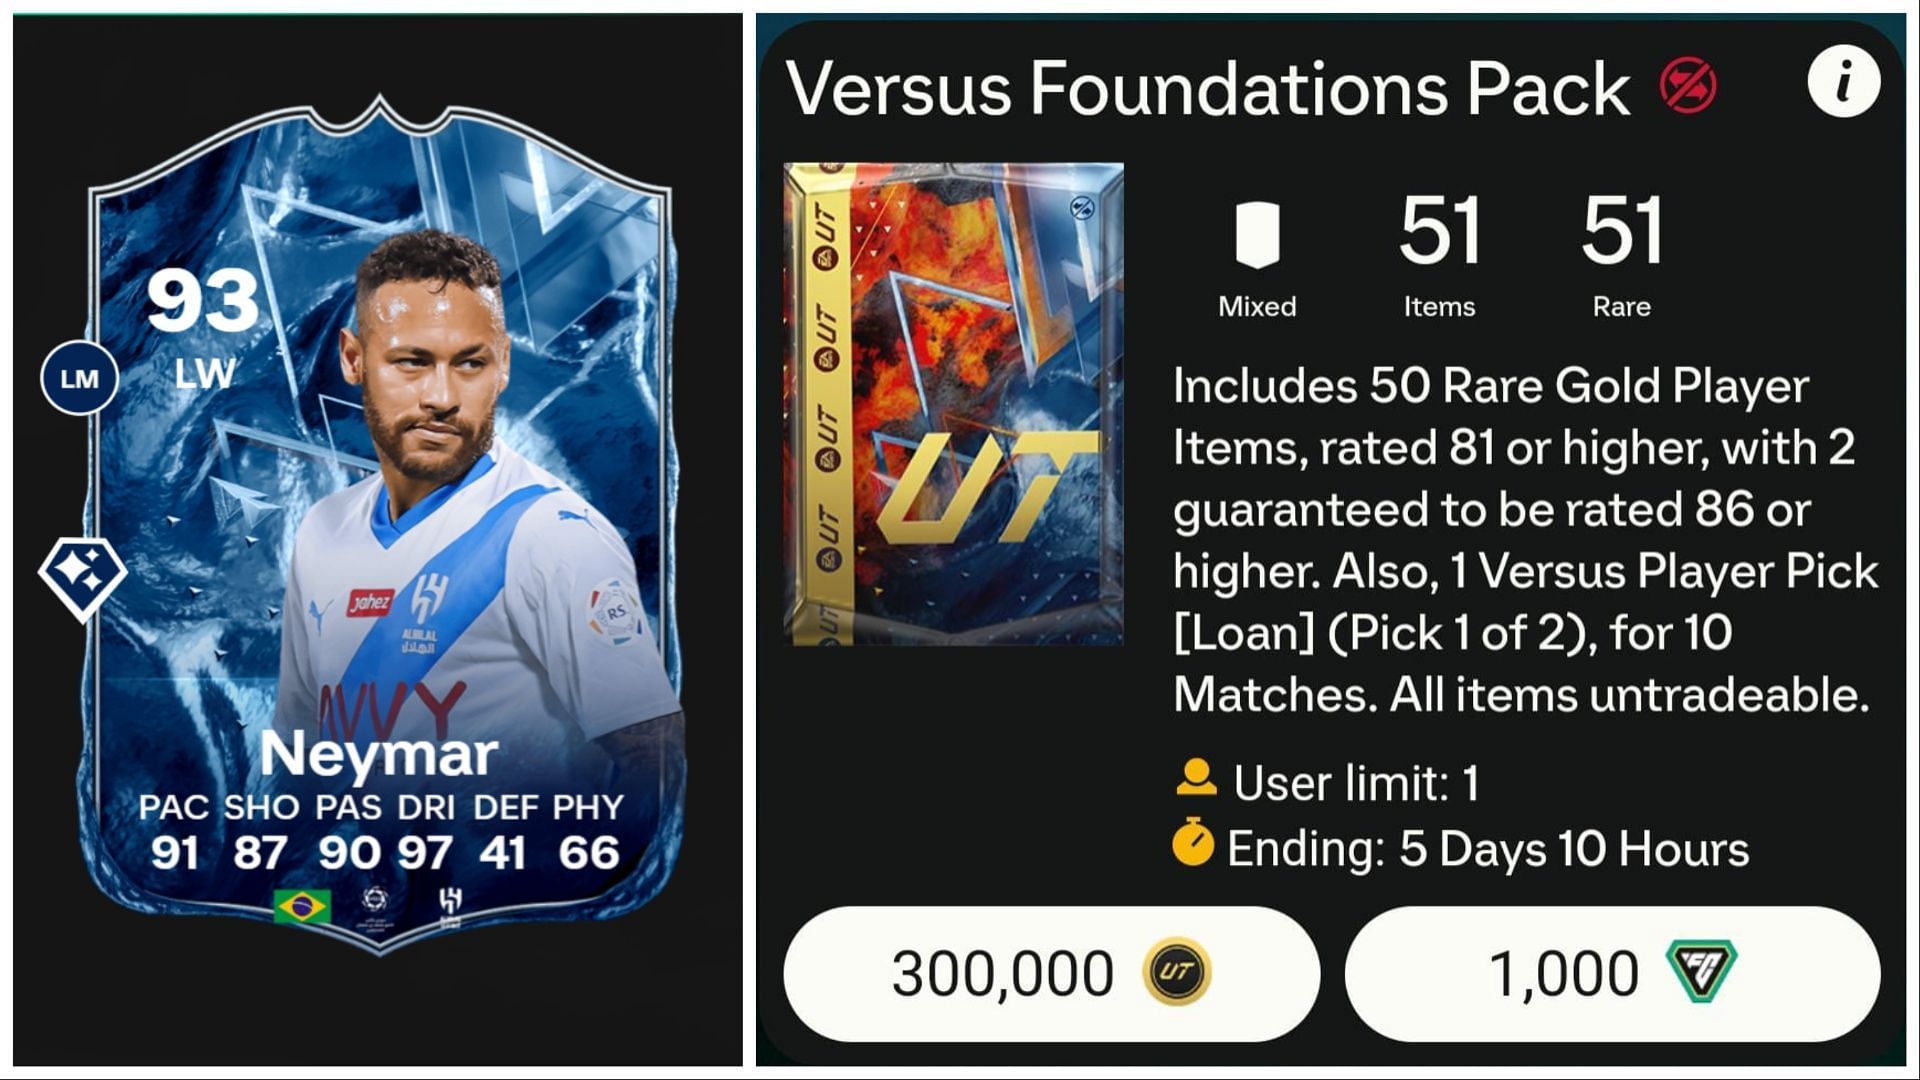 The latest special pack is now live. (Images via FUTBIN and EA Sports)